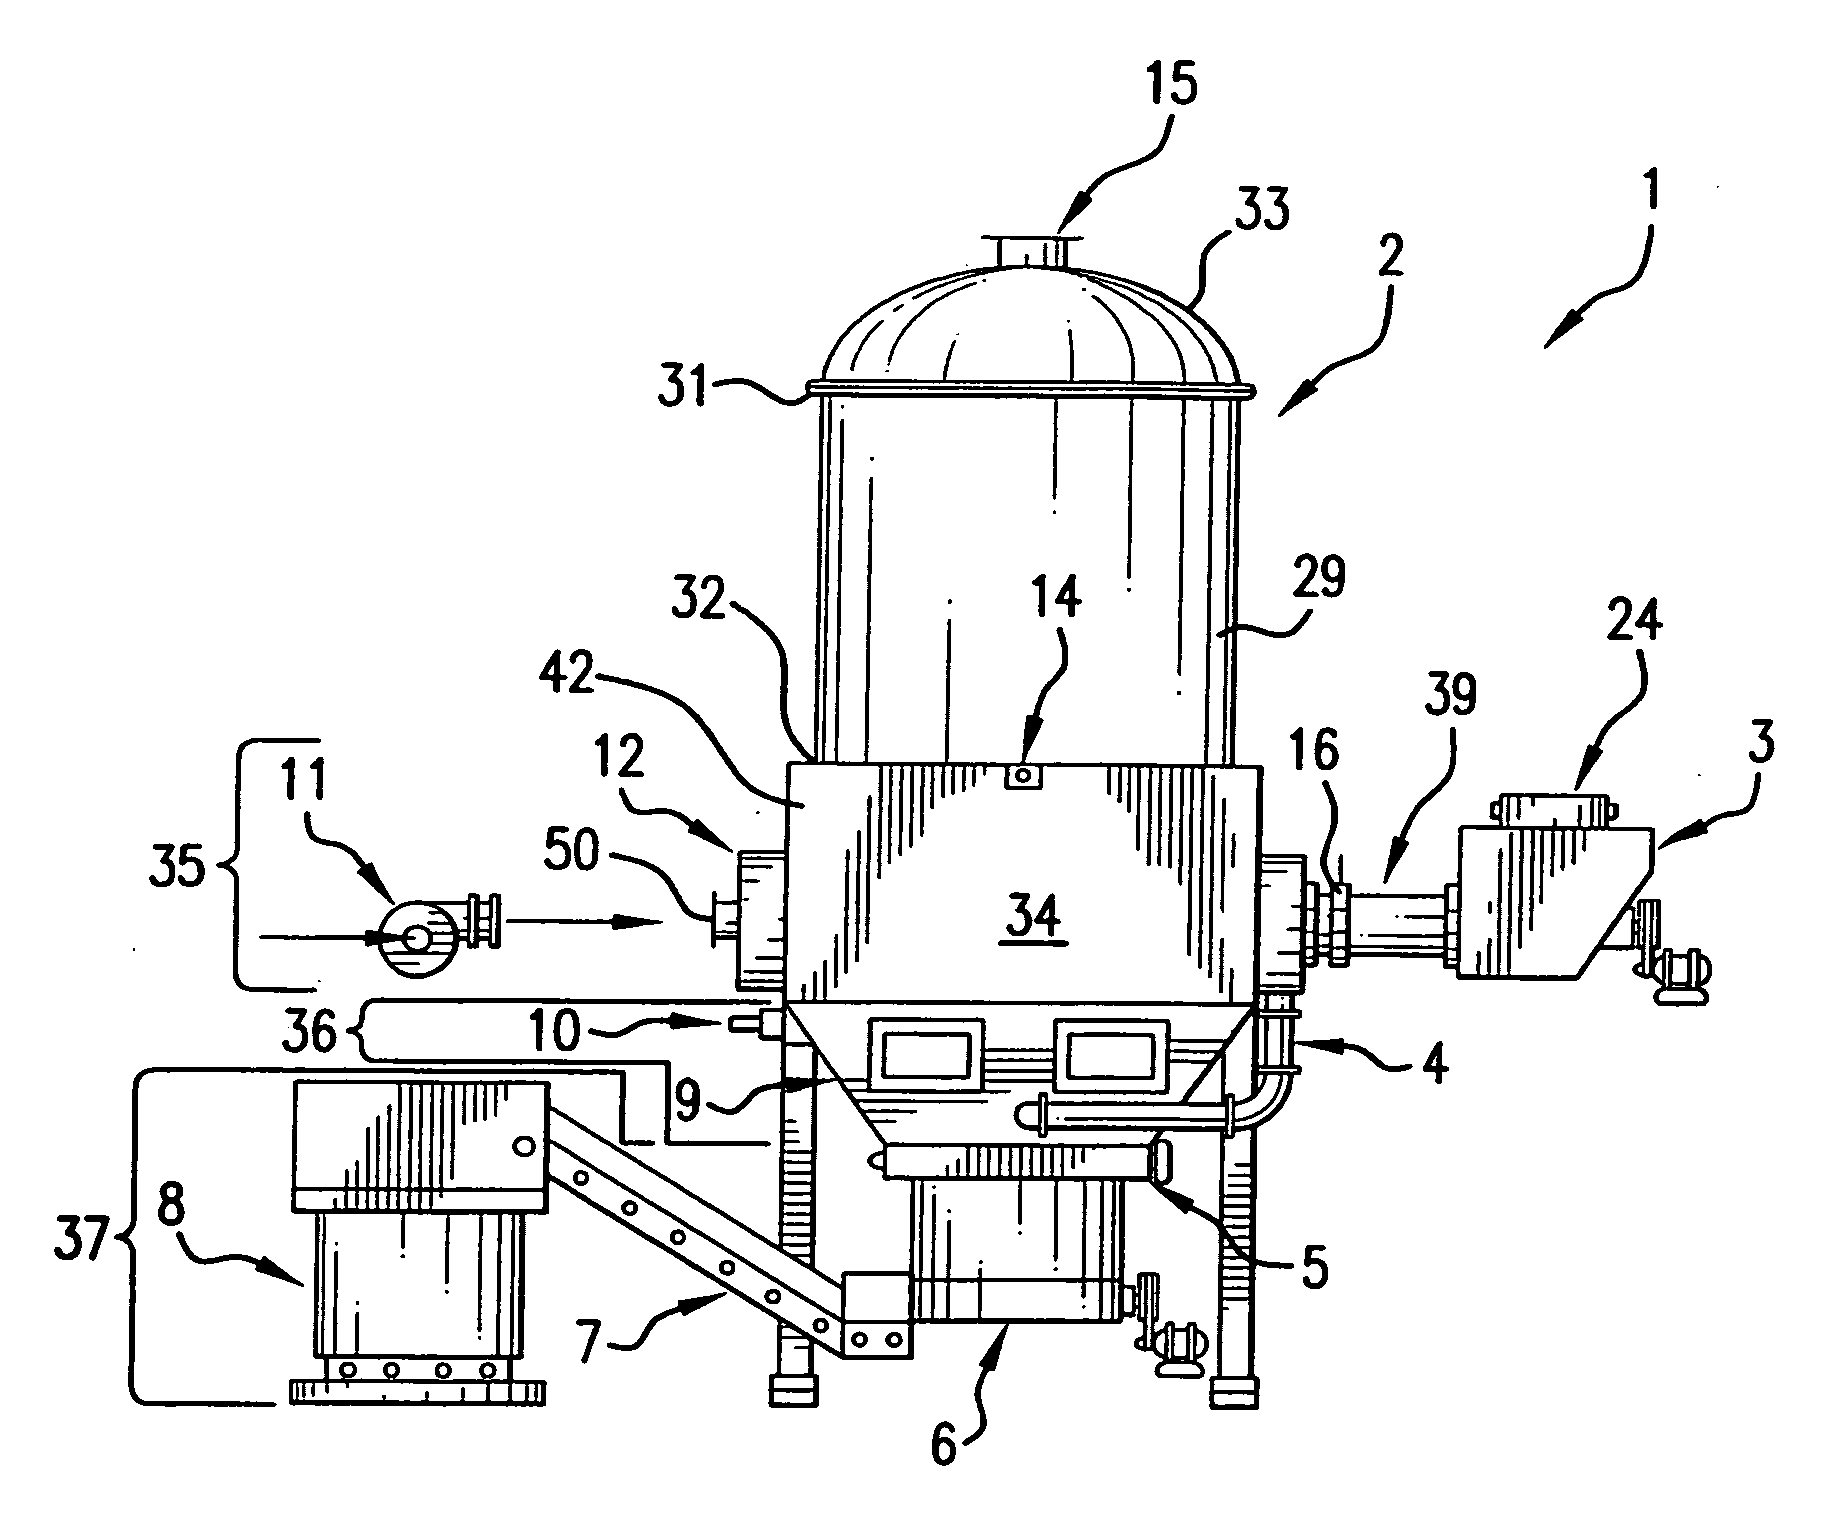 Gasifier and gasifier system for pyrolizing organic materials